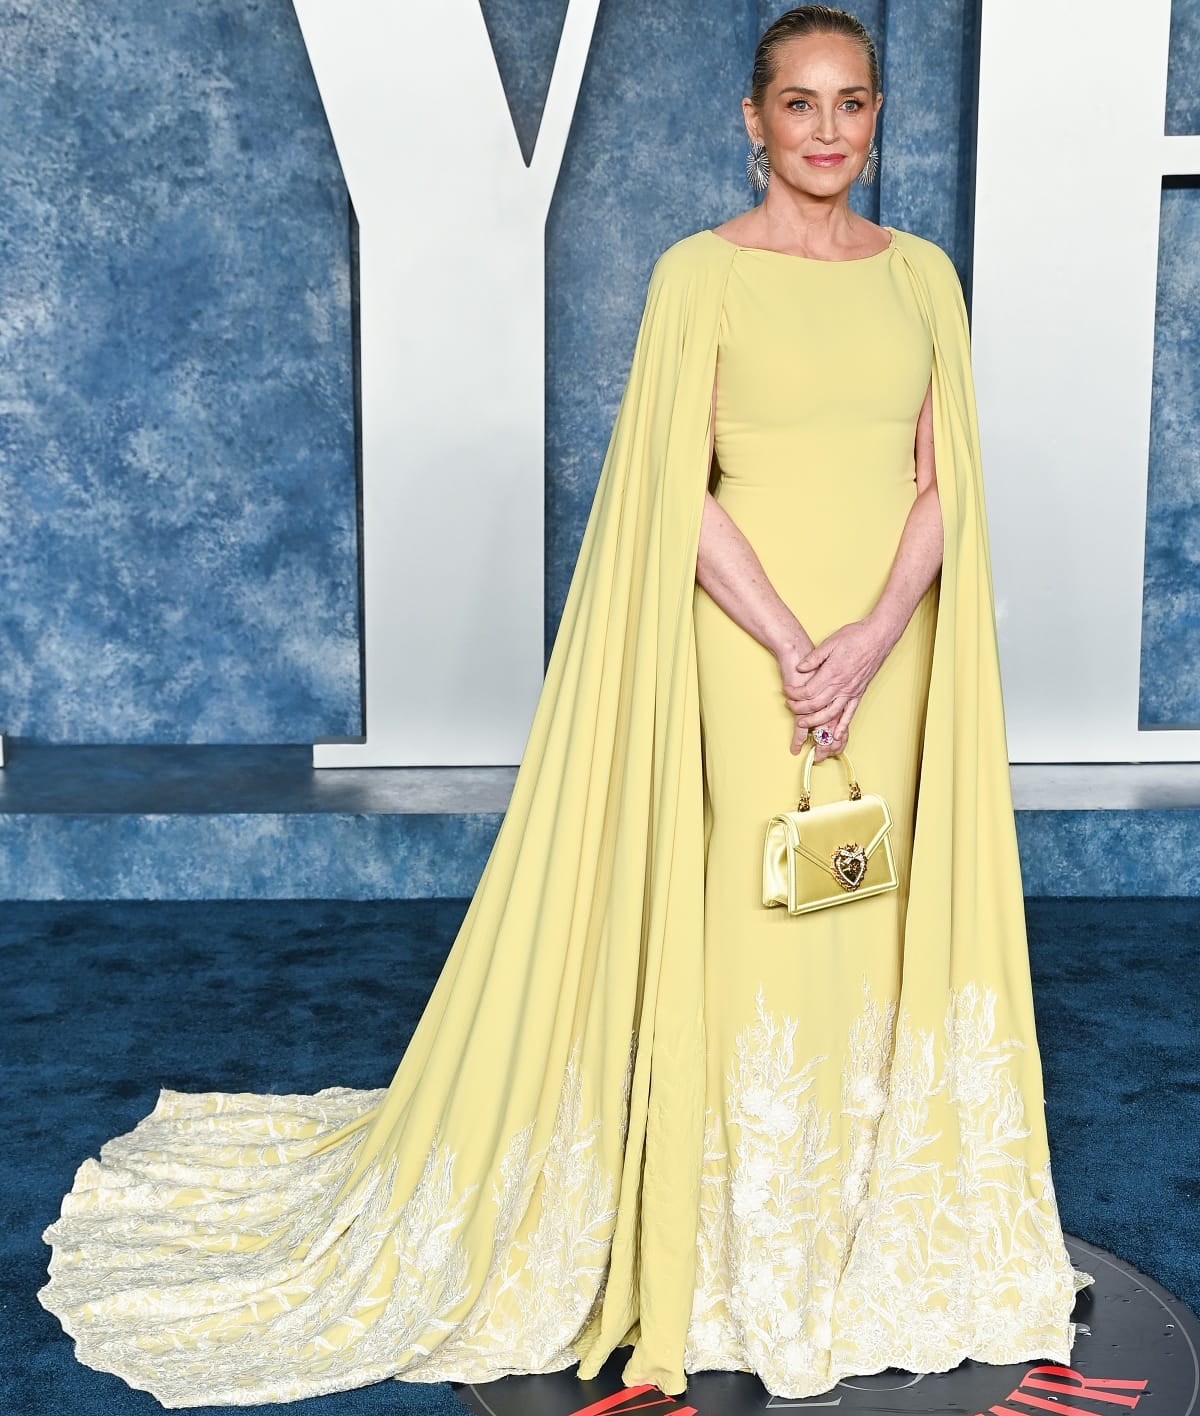 Sharon Stone looked every bit the movie star in her radiant yellow Tony Ward Fall 2017 Couture archive gown with a matching Dolce & Gabbana bag and Giorgio B jewelry at the 2023 Vanity Fair Oscar Party